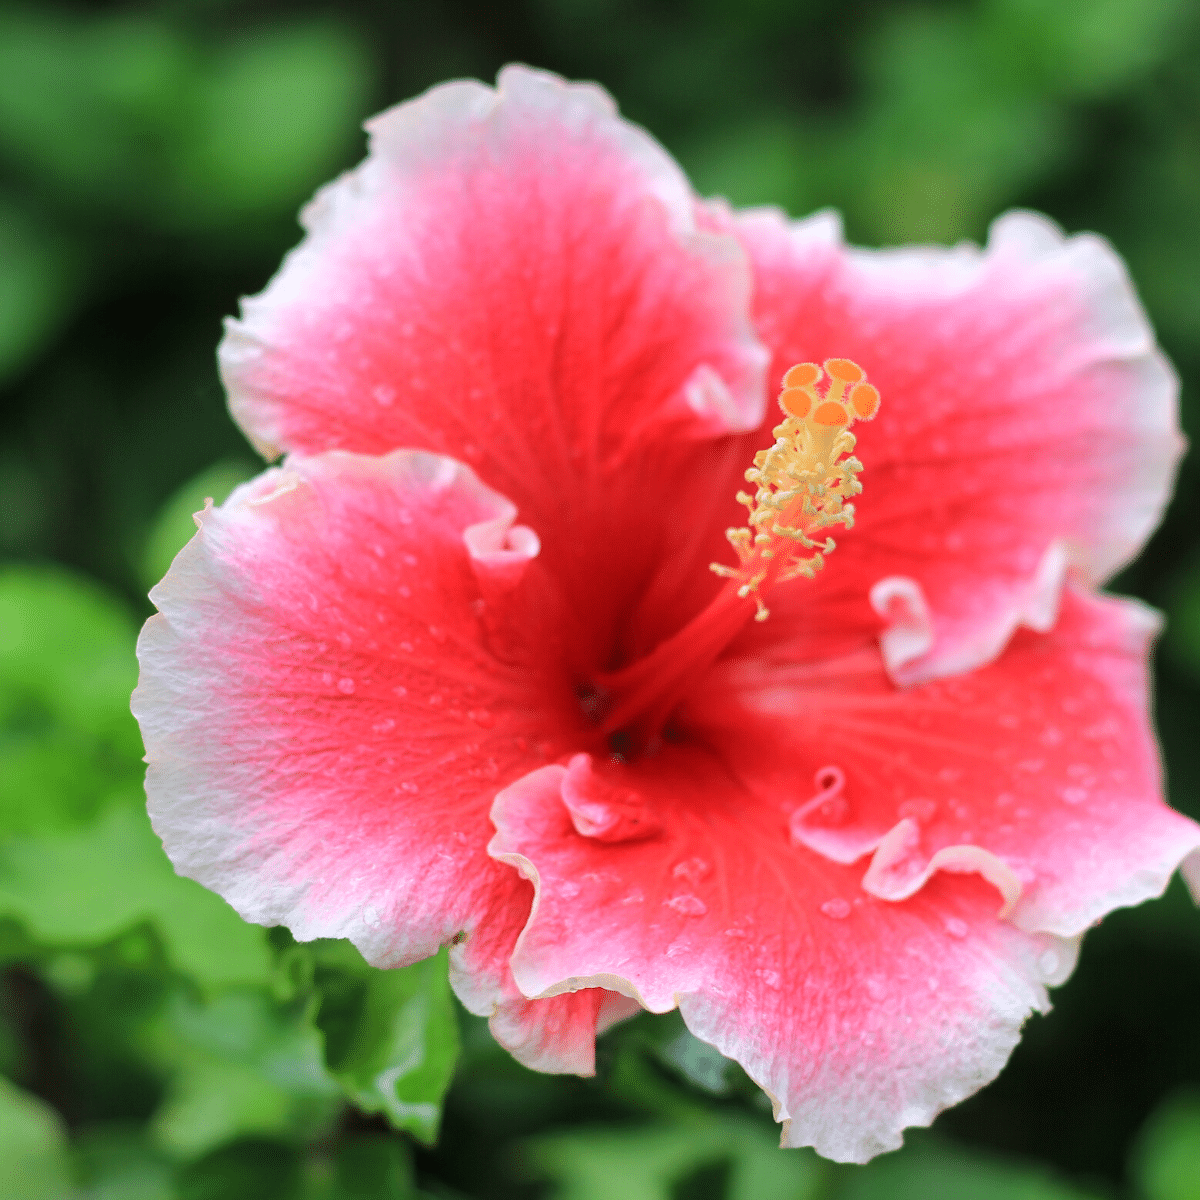 Dark and light pink hibiscus flower on the plant.